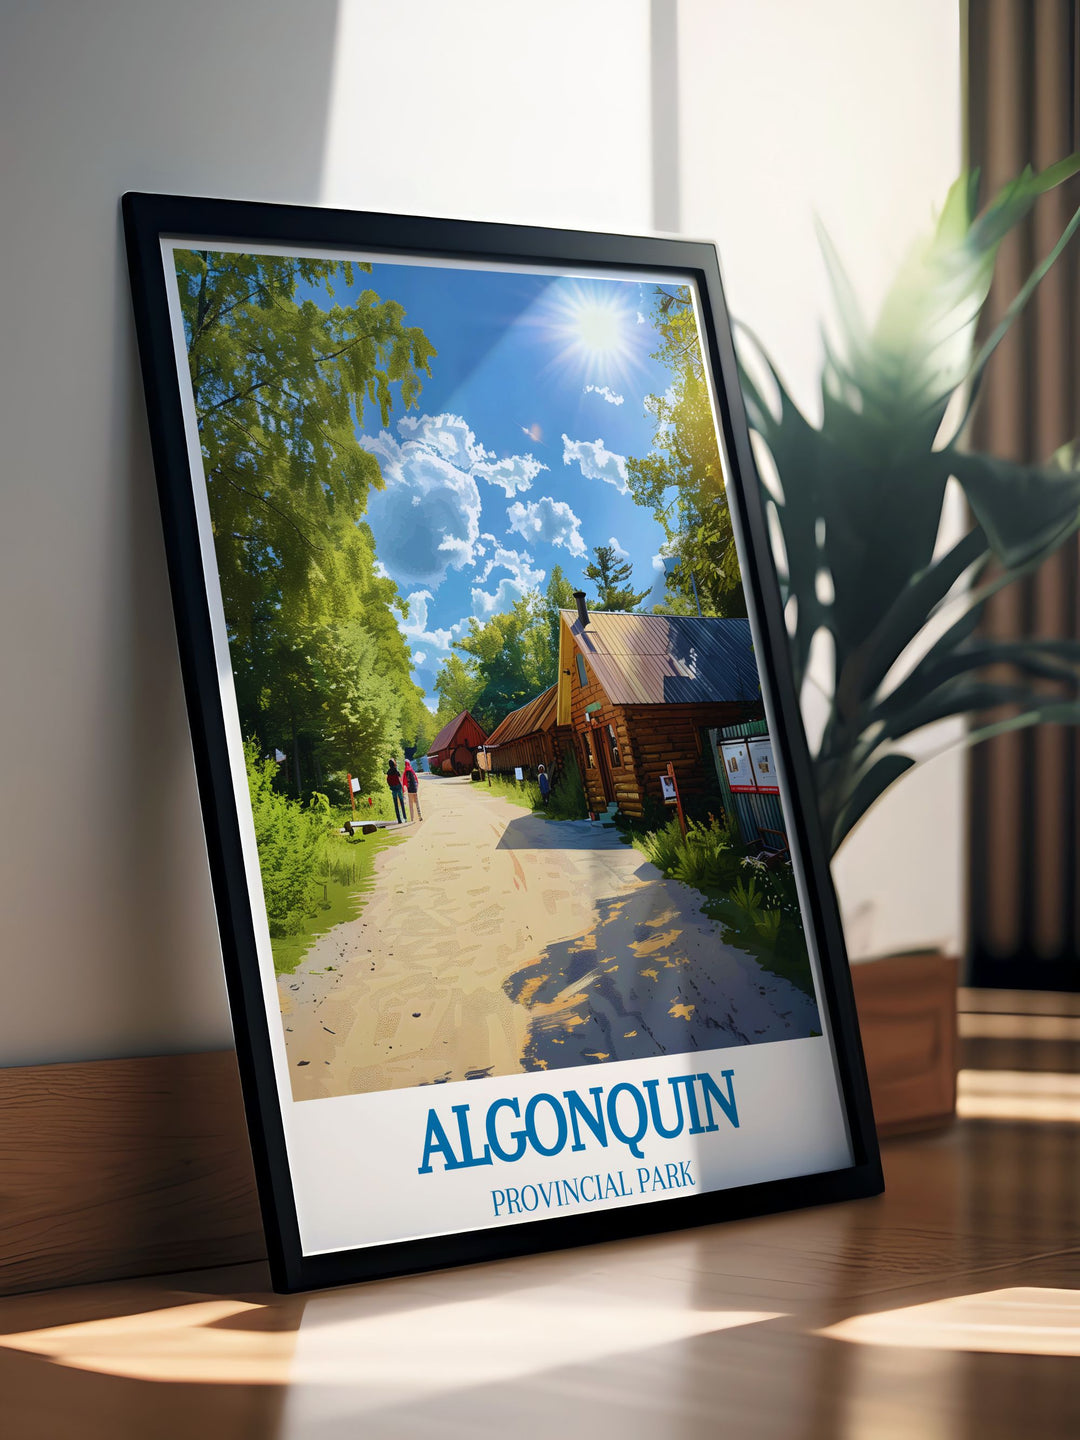 The Algonquin Logging Museum canvas art print beautifully depicts the museums historical significance within the pristine landscapes of Algonquin Provincial Park, making it a perfect gift for lovers of Canadian nature and history.